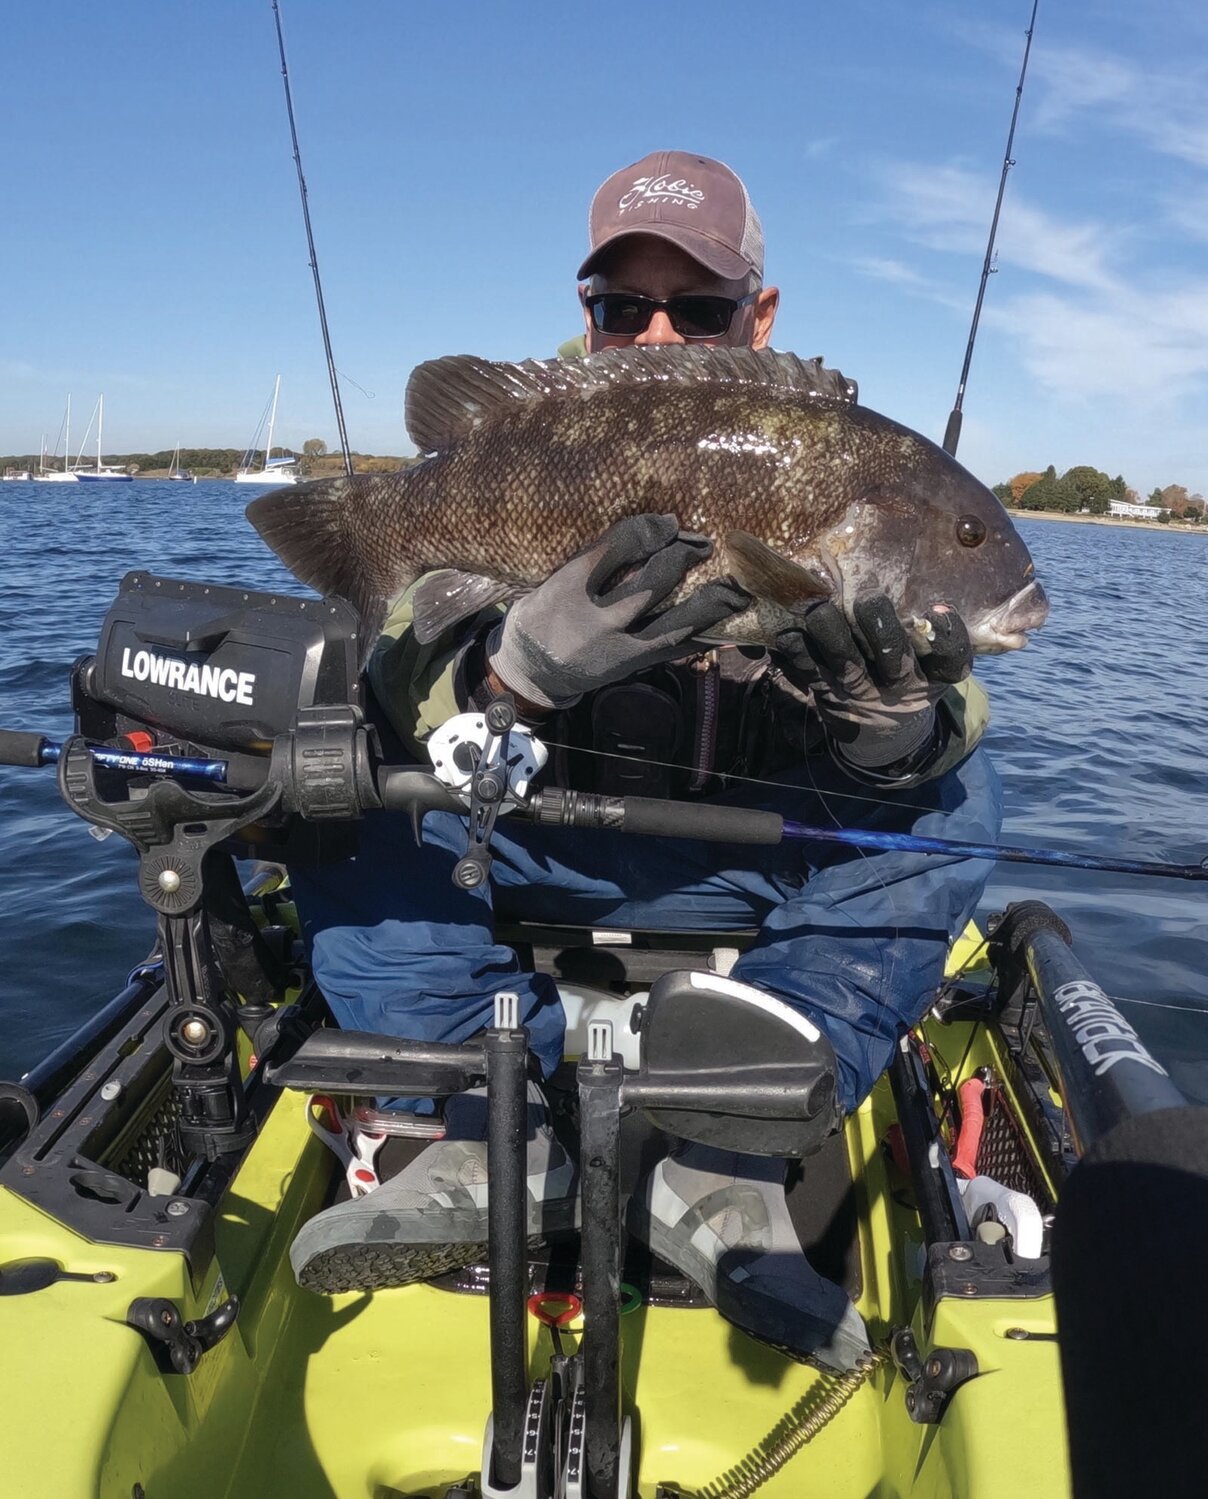 KAYAK CATCH: Kayak angler Tom Houde, said, “Caught a stringer of keeper tog last week in the West Bay including this 21-inch female which was released after a quick photo. Water temp 60 degrees, depth 20 inches.